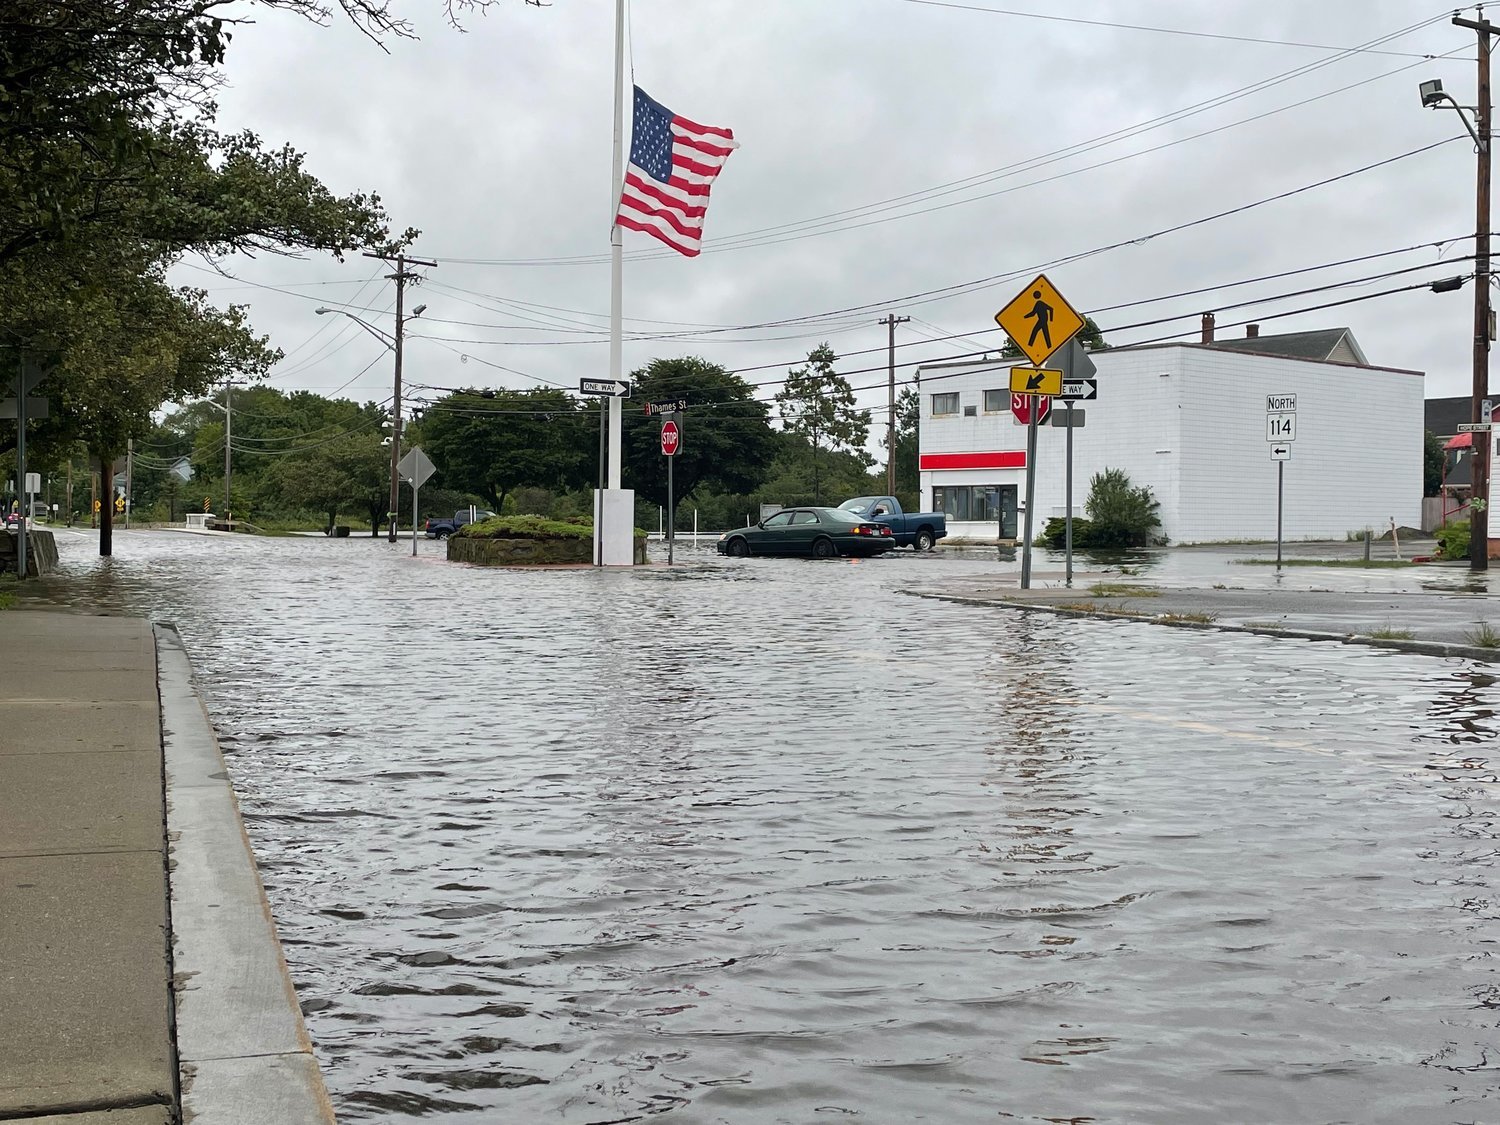 A view of Thames Street, looking north toward Hope Street, when the area flooded as the remnants of Hurricane Ida passed through the region last month. Projections say much of Thames Street is at risk from major storms in the future.